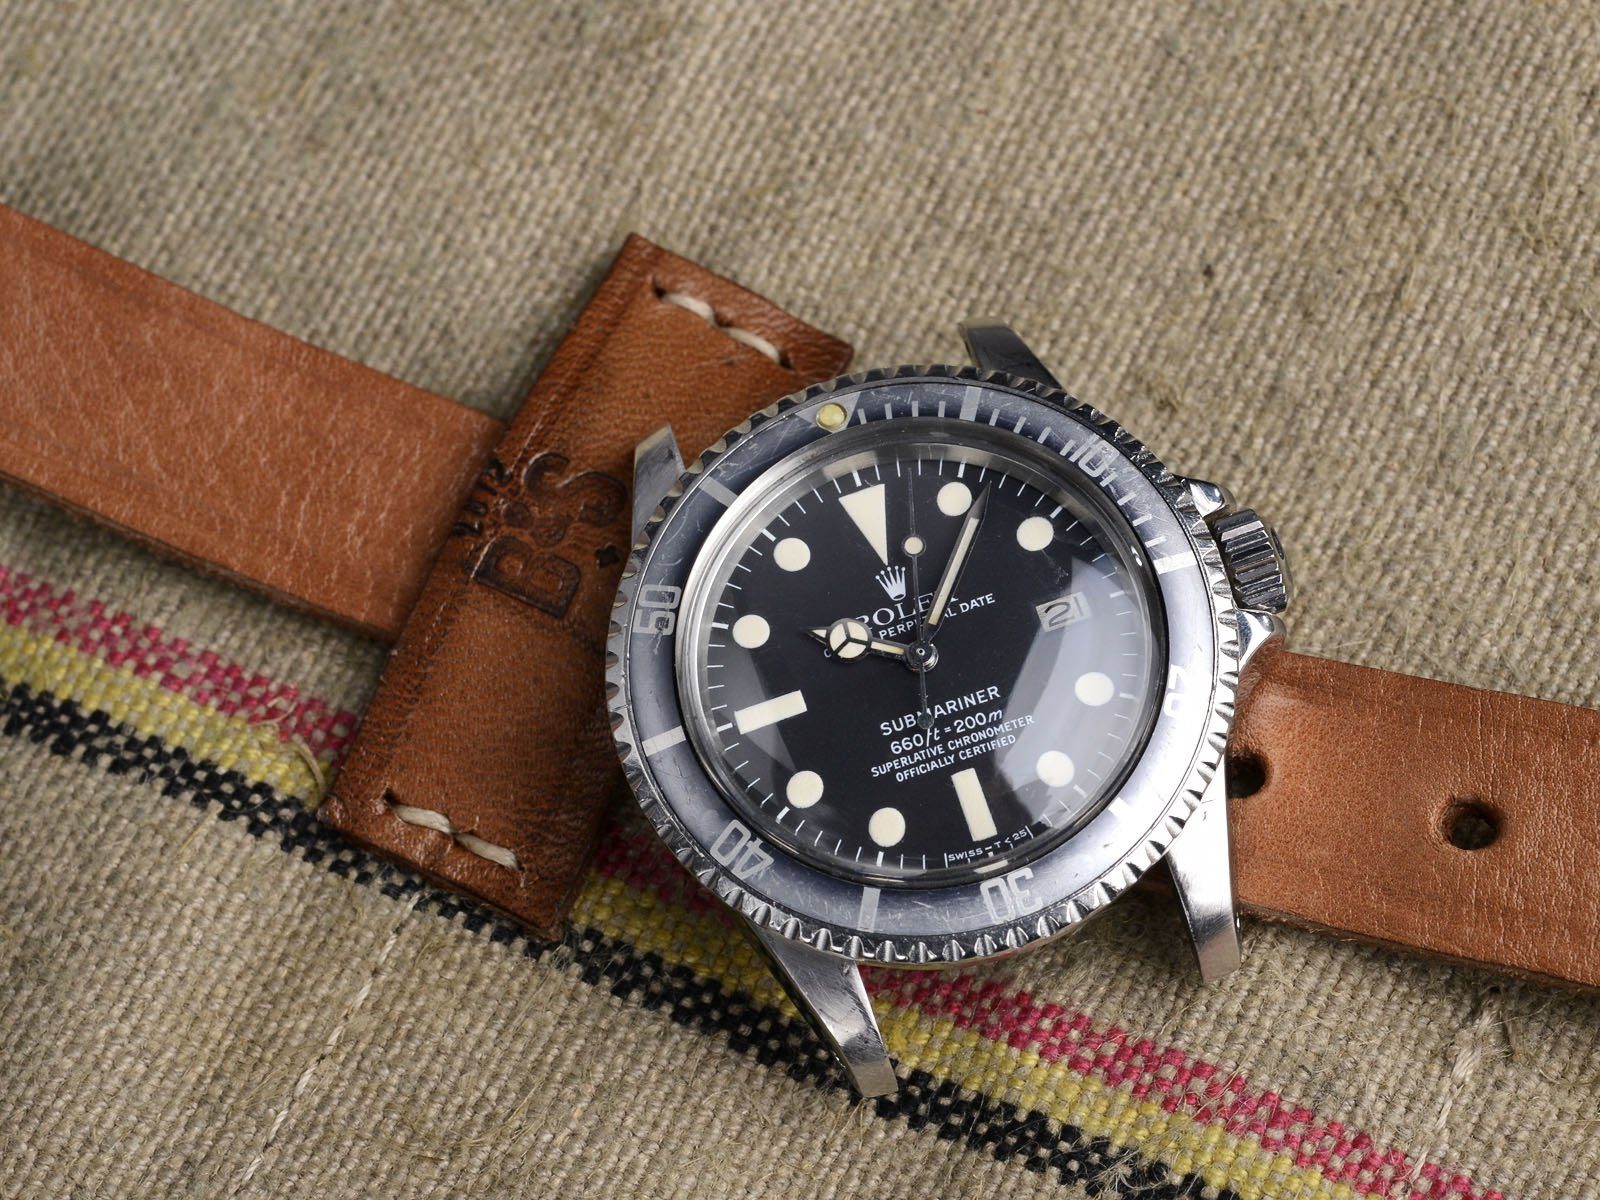 CURATED ‘GHOST REBEL’ ROLEX 1680 SUBMARINER